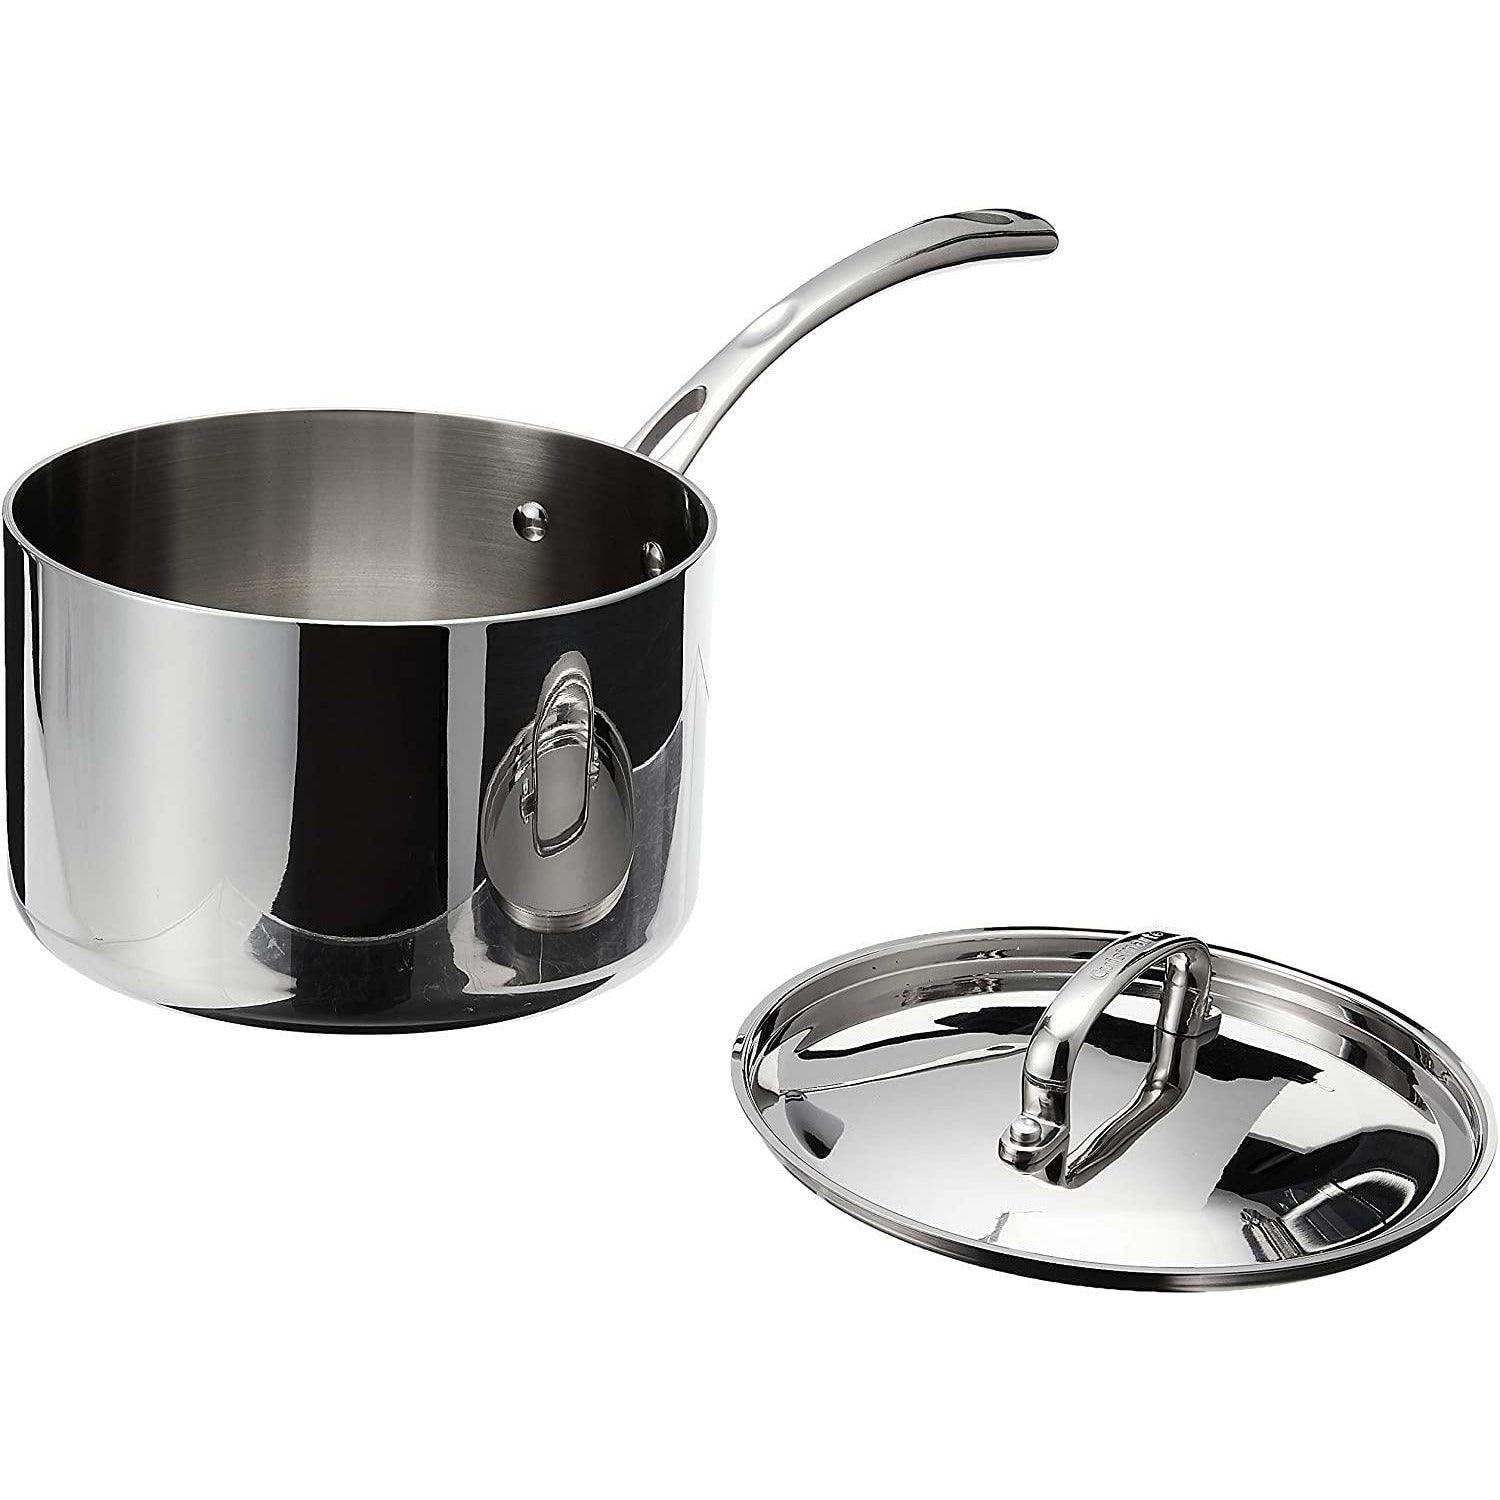 French Classic Tri-Ply Stainless Cookware 4 Quart Saucepan with Cover